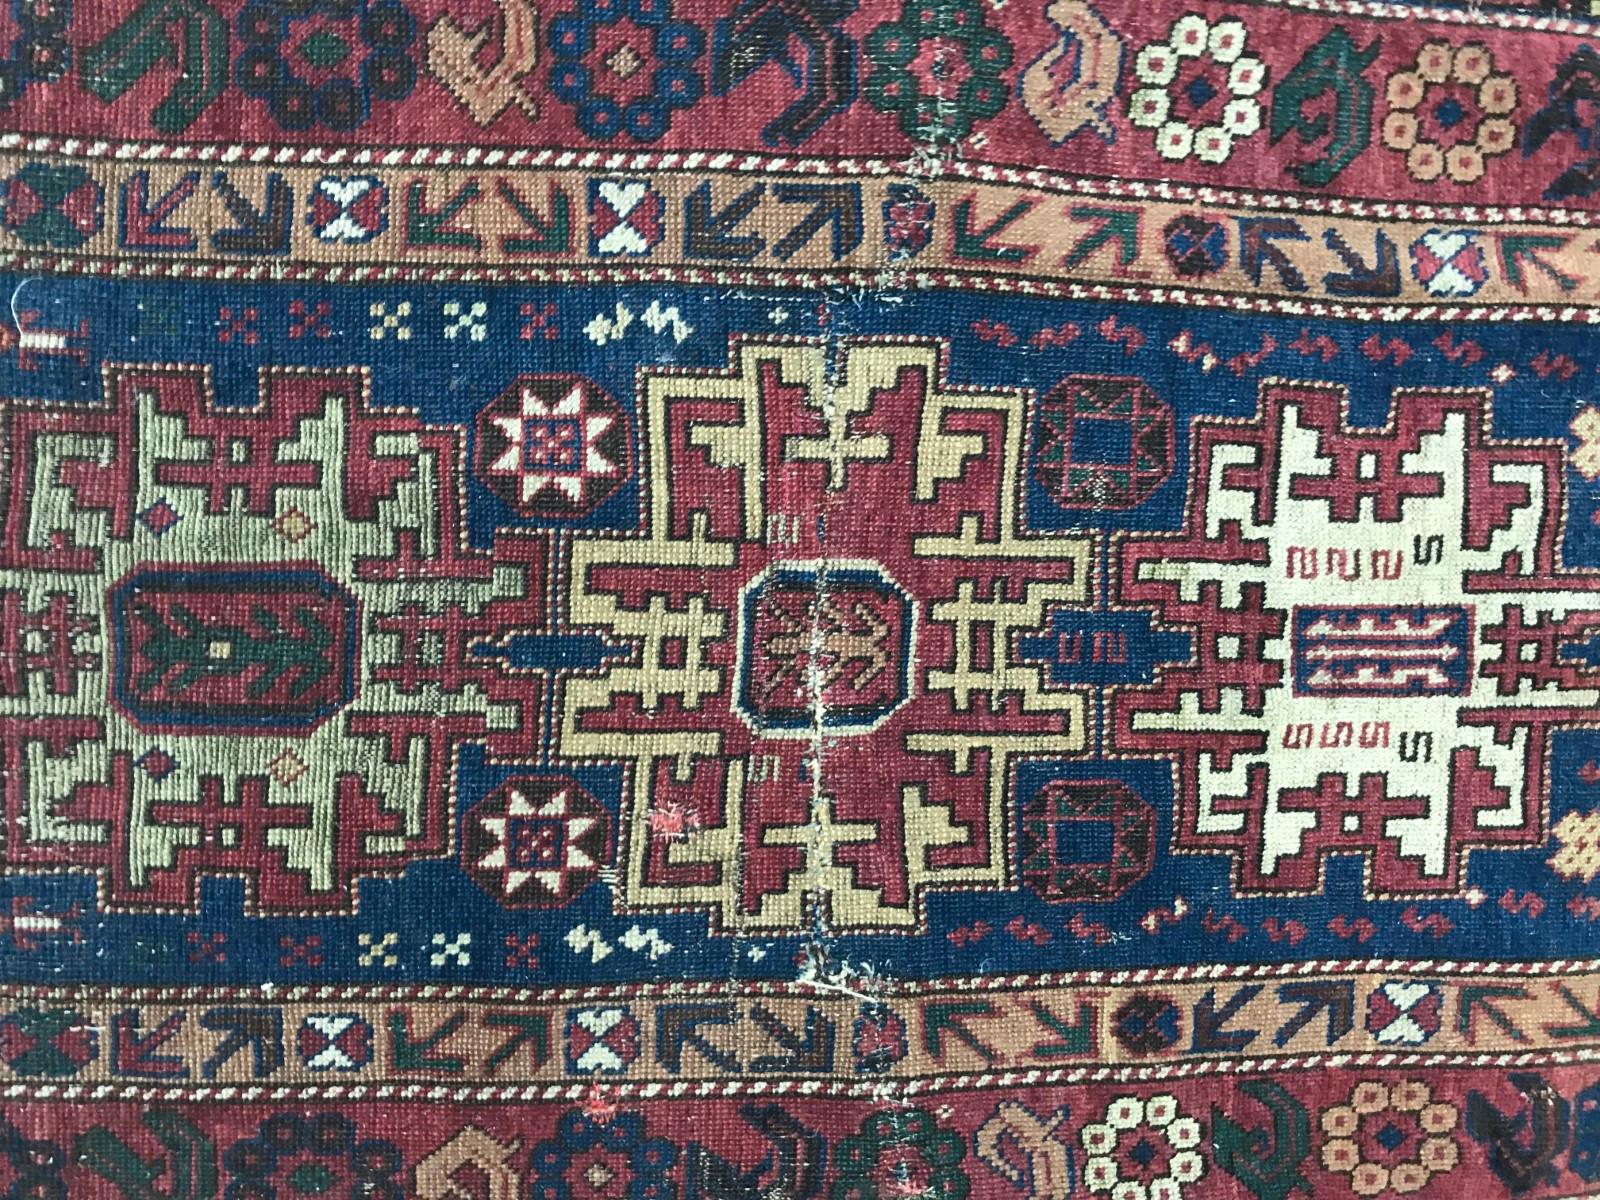 Late 19th century Caucasian Shirwan rug with natural colors with blue, orange, yellow, purple and green, and a lesgui geometrical design, entirely hand knotted with wool velvet on wool foundation.